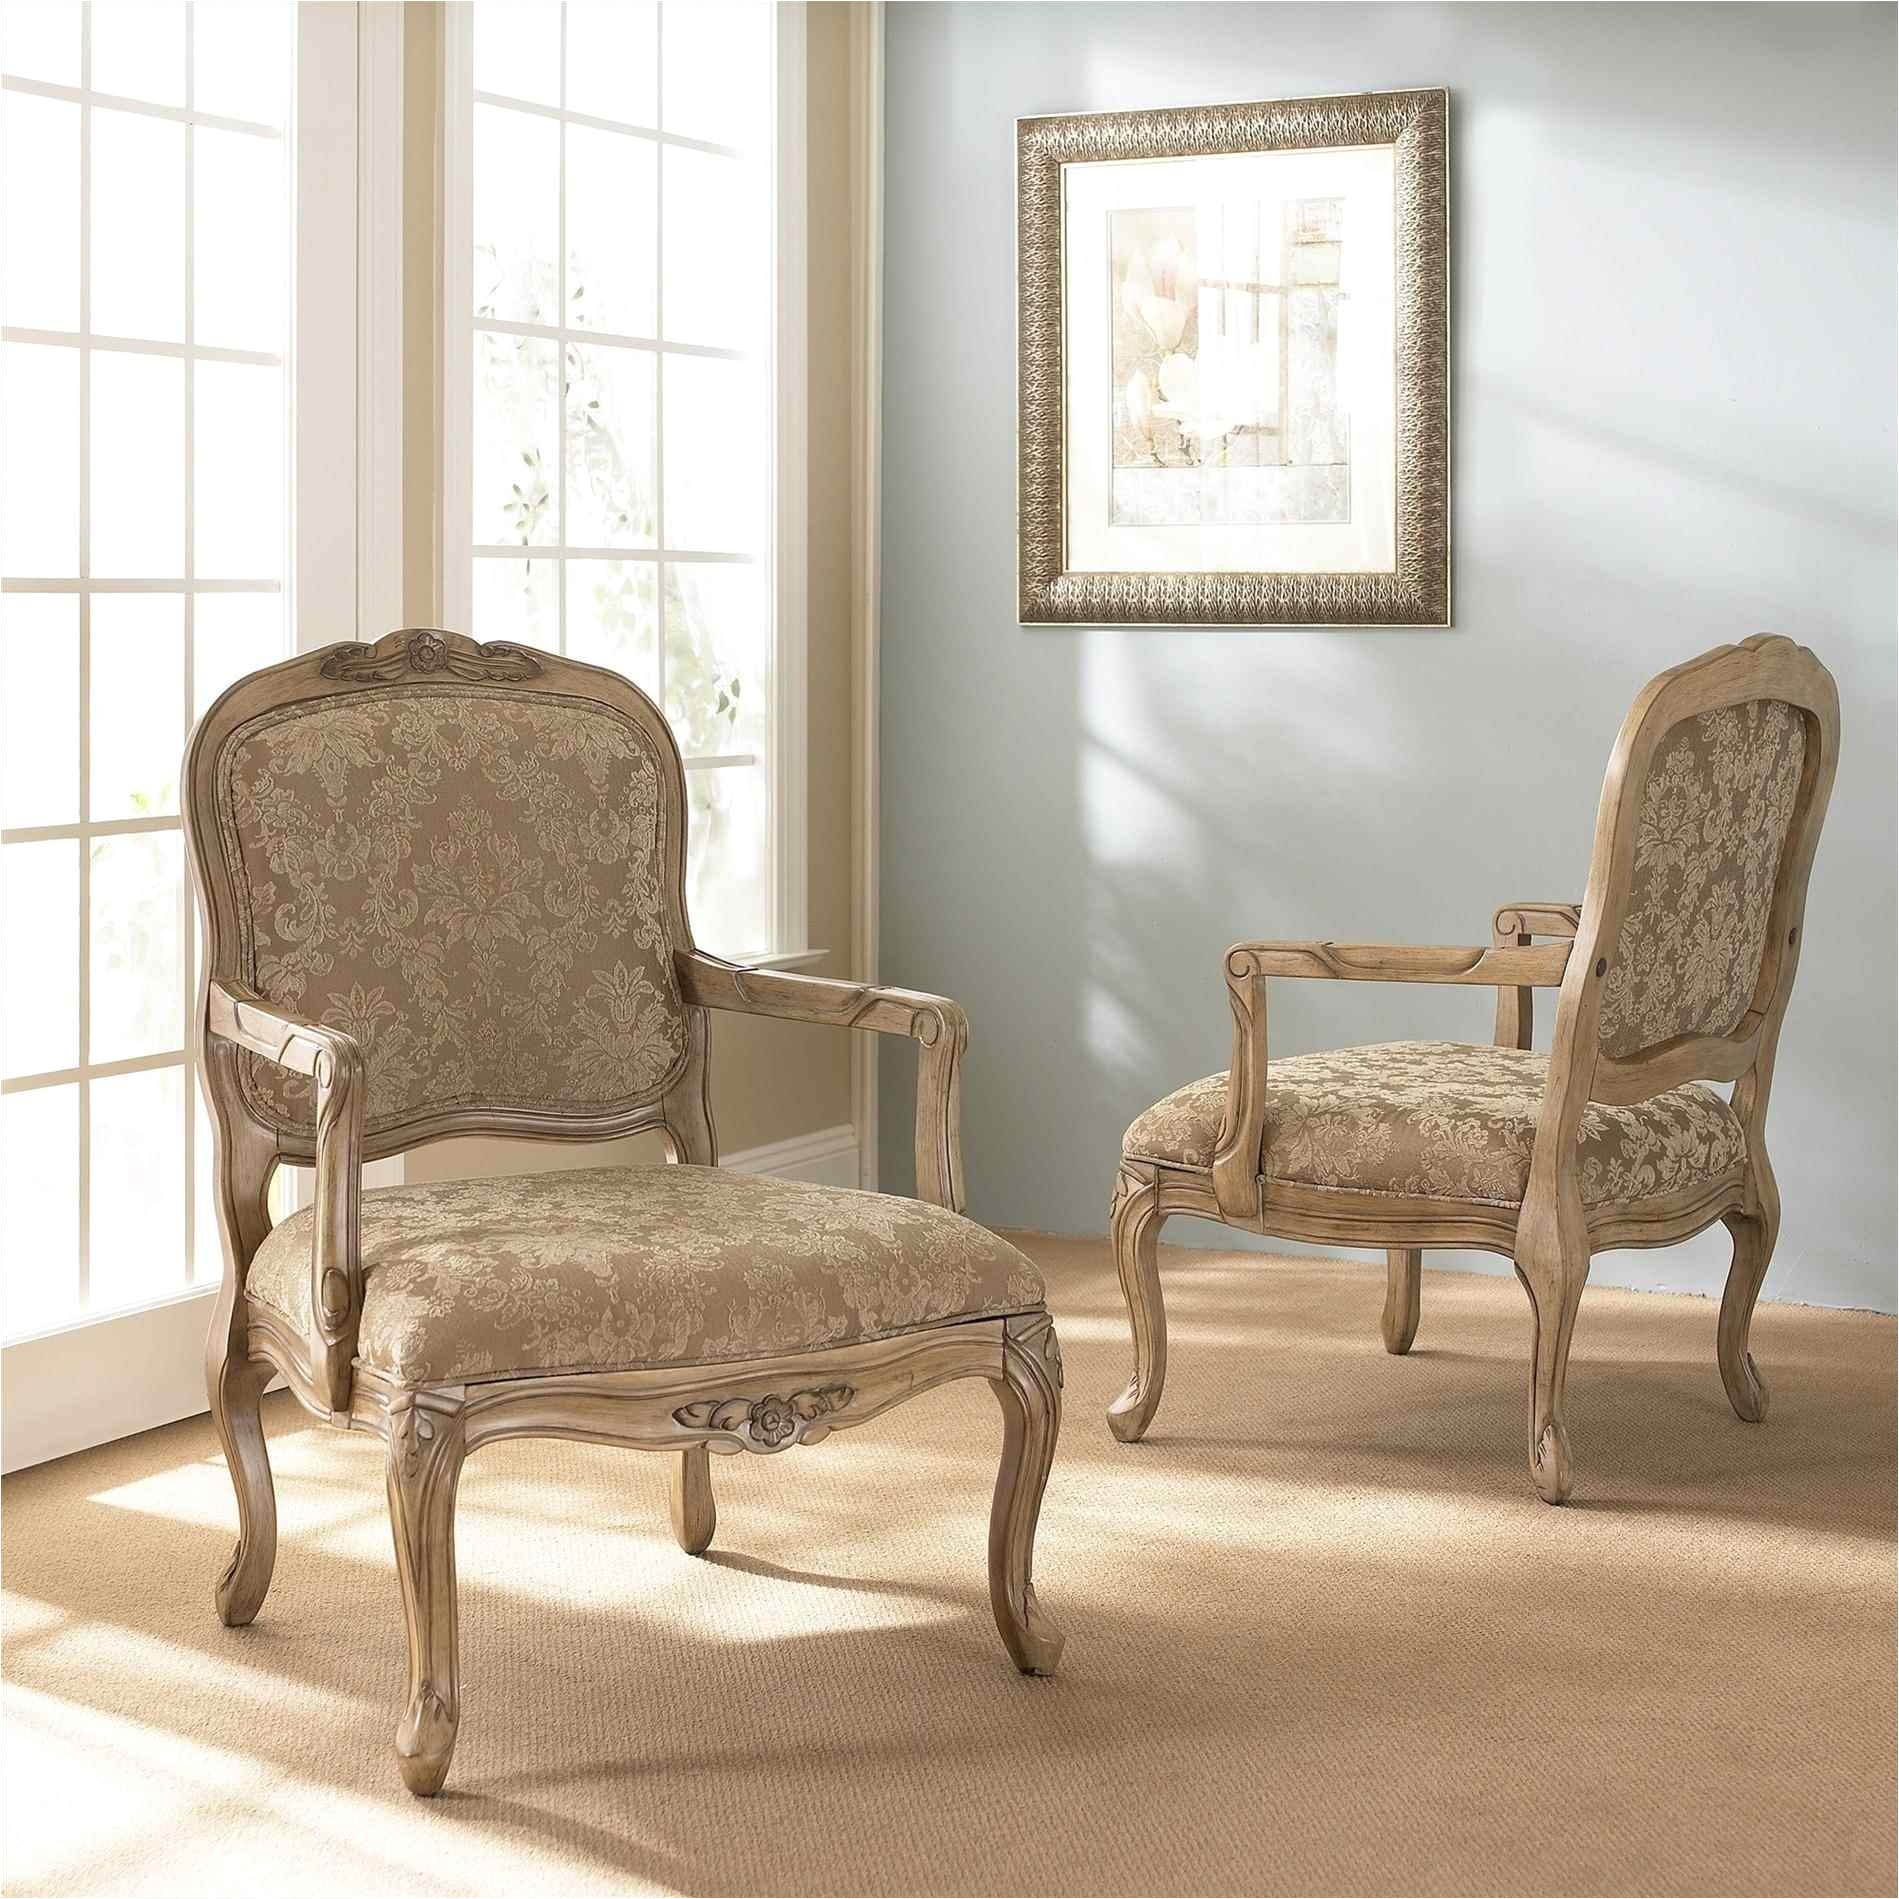 Living Room Chairs Cheap Living Room Most Comfortable Living Room Chair Leather Living